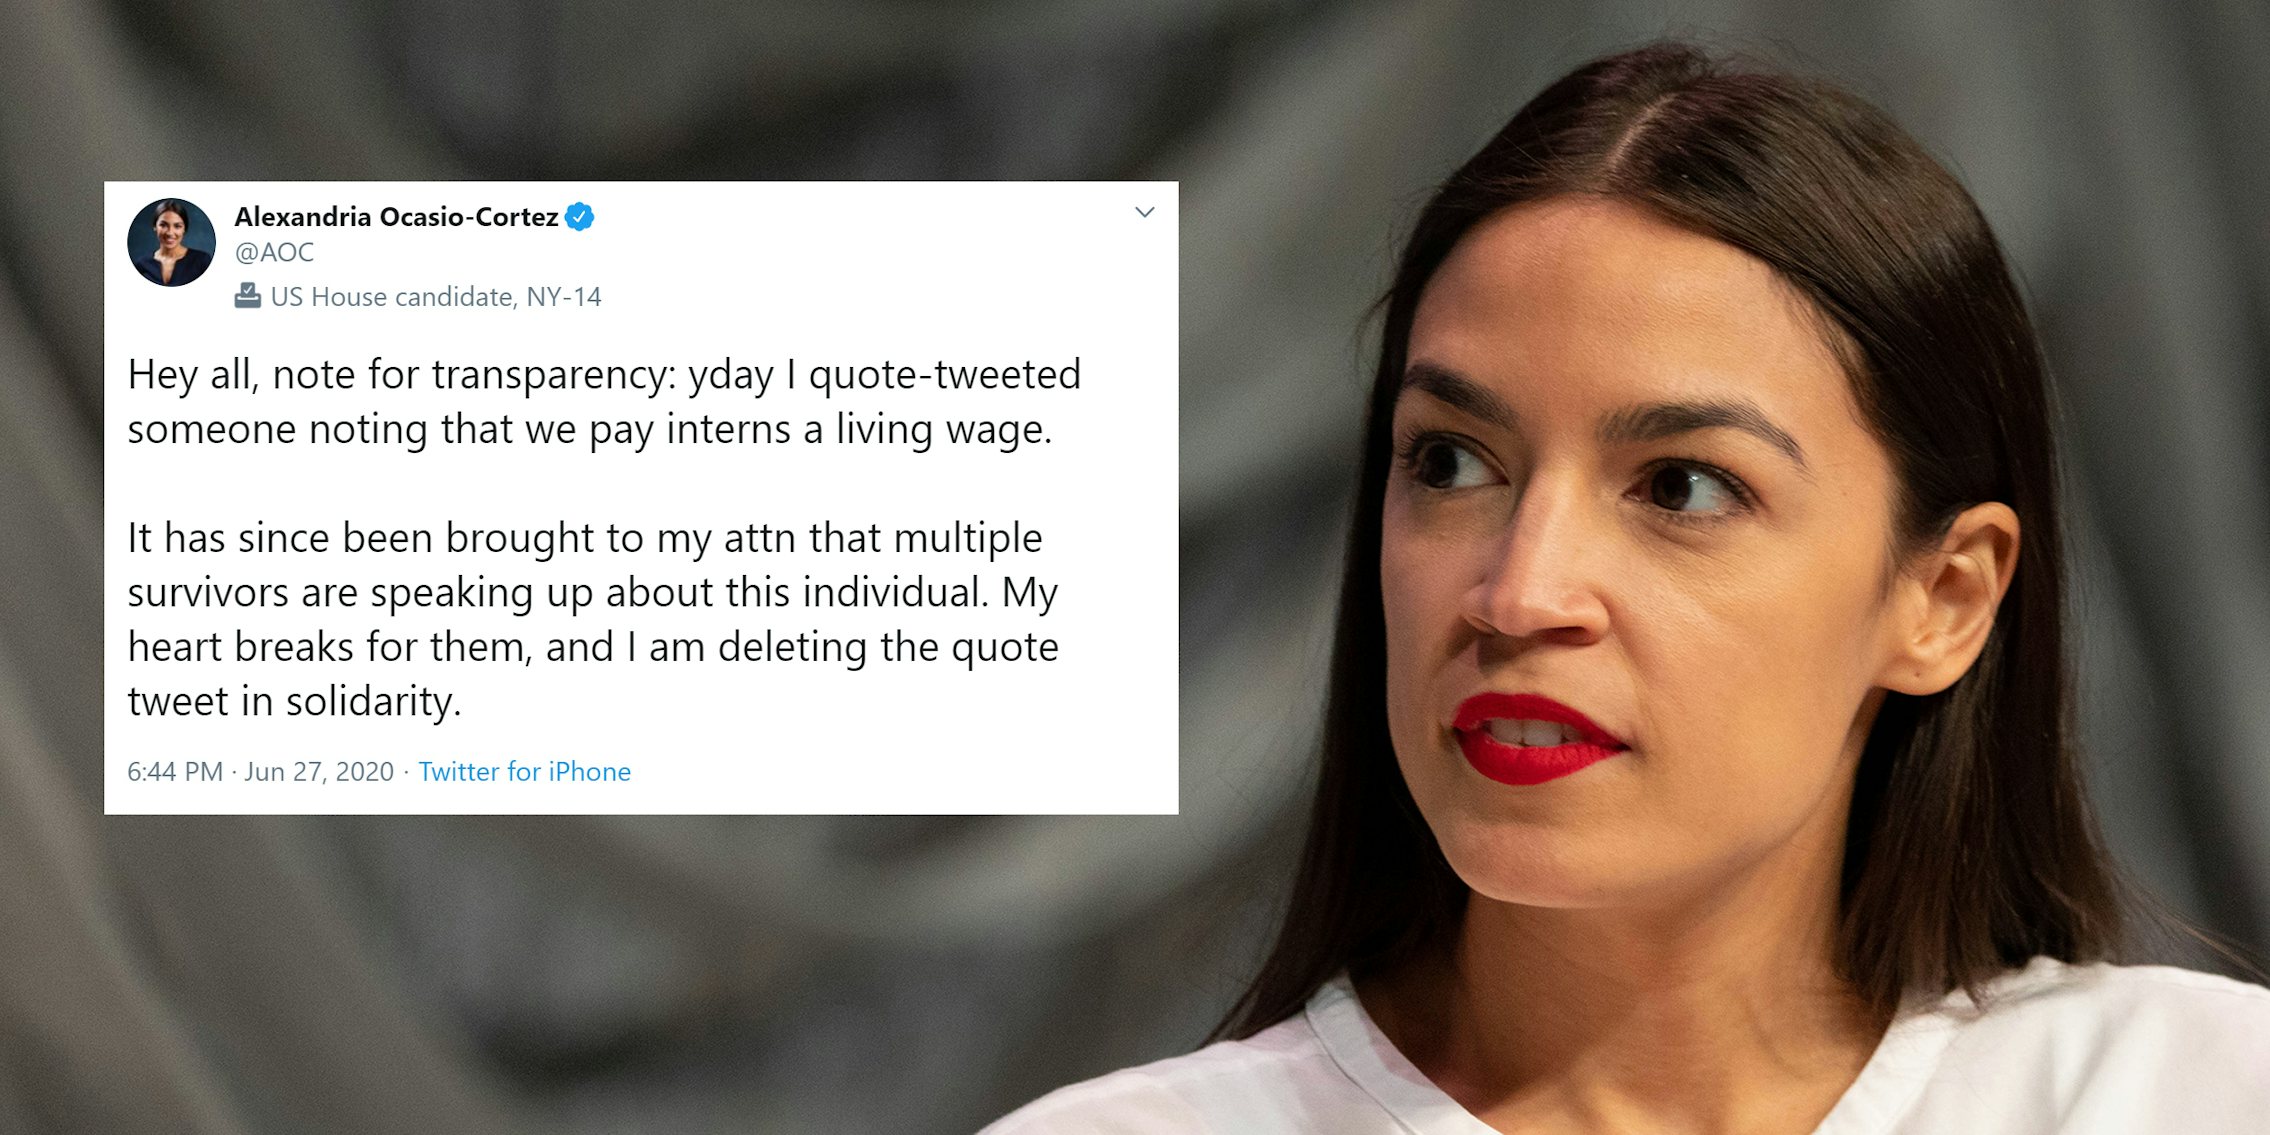 Alexandria Ocasio-Cortez with tweet 'Hey all, note for transparency: yday I quote-tweeted someone noting that we pay interns a living wage. It has since been brought to my attn that multiple survivors are speaking up about this individual. My heart breaks for them , and I am deleting the quote tweet in solidarity.